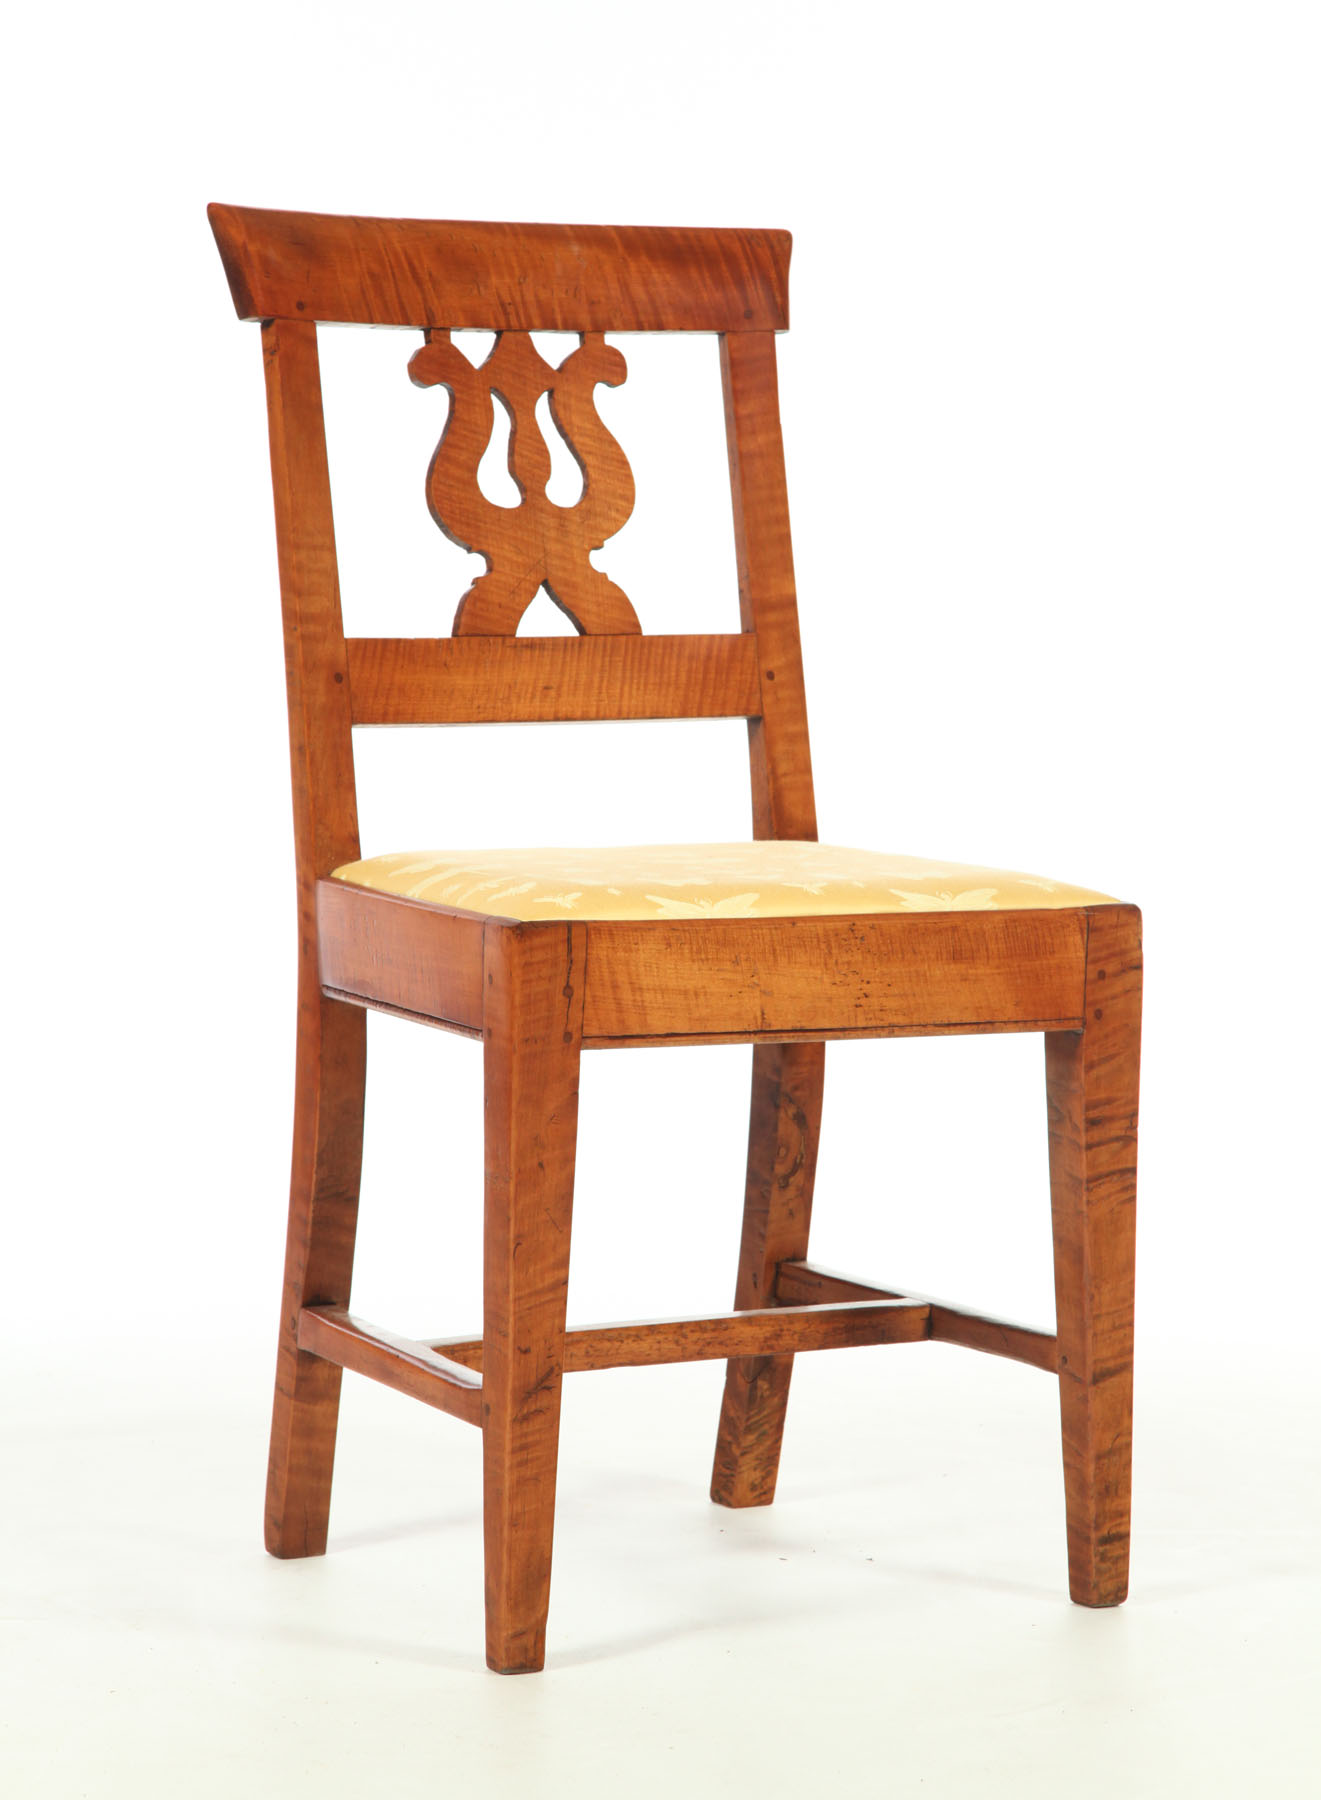 CLASSICAL SIDE CHAIR Probably 1237df